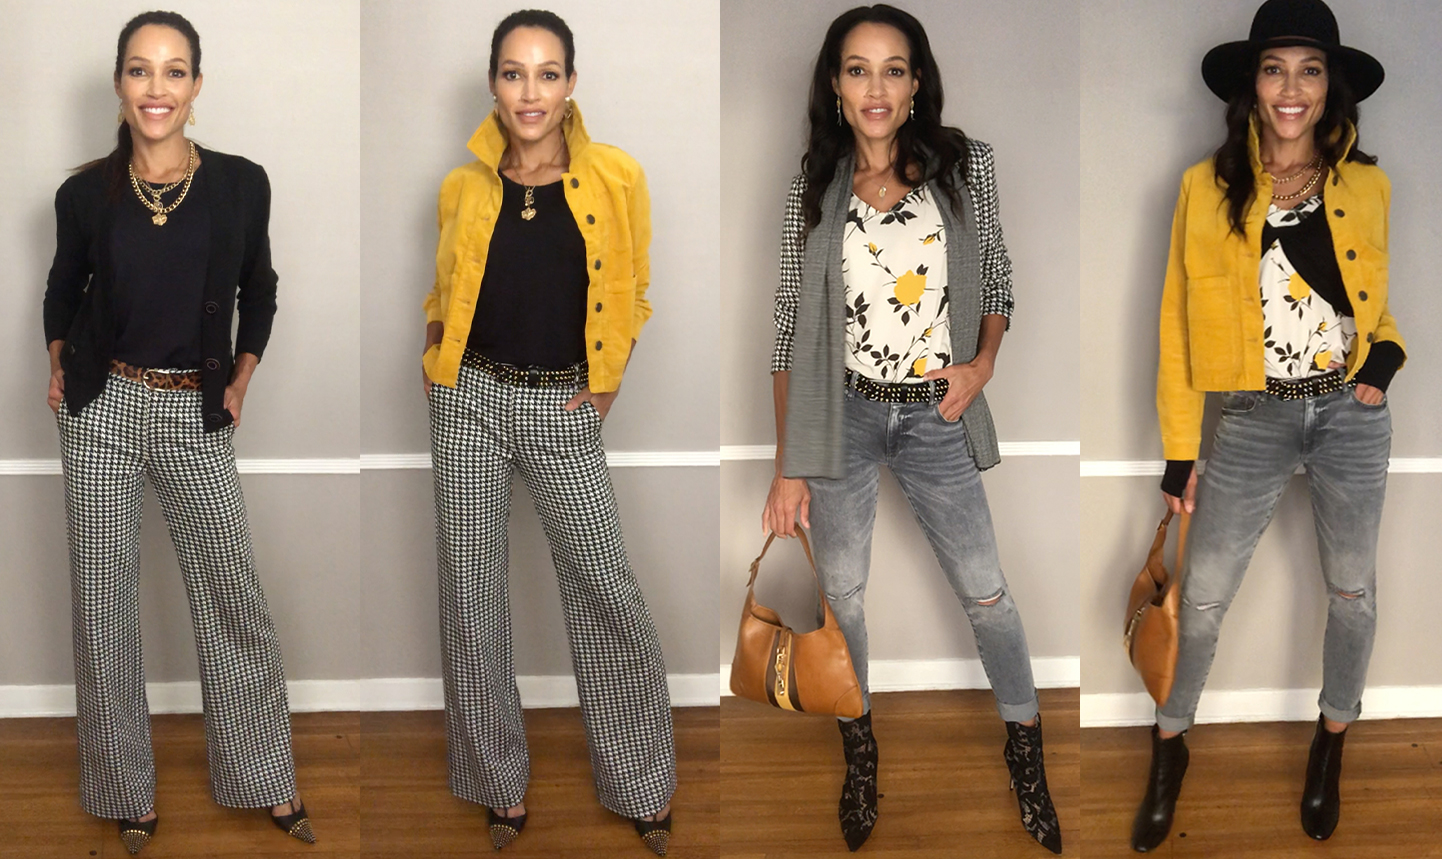 Mustard Dress Pants Outfits For Women (3 ideas & outfits)